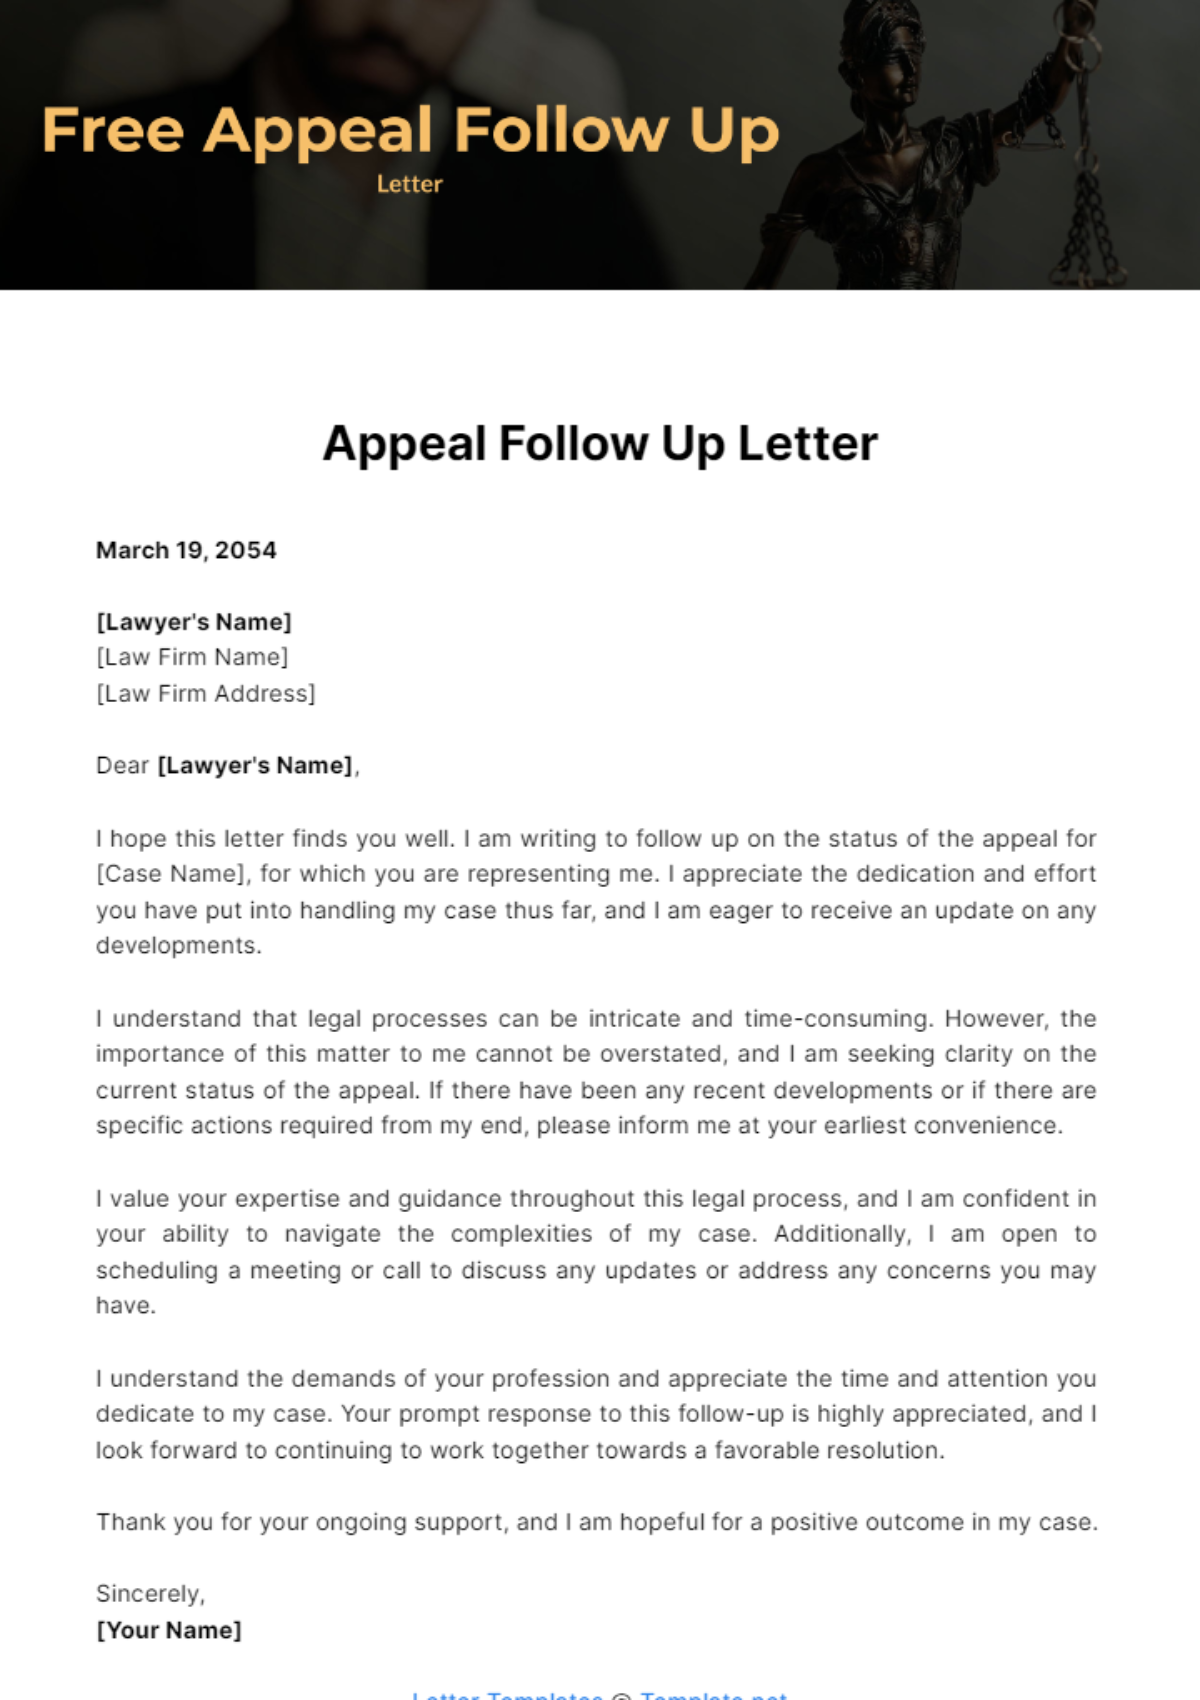 Free Appeal Follow Up Letter Template